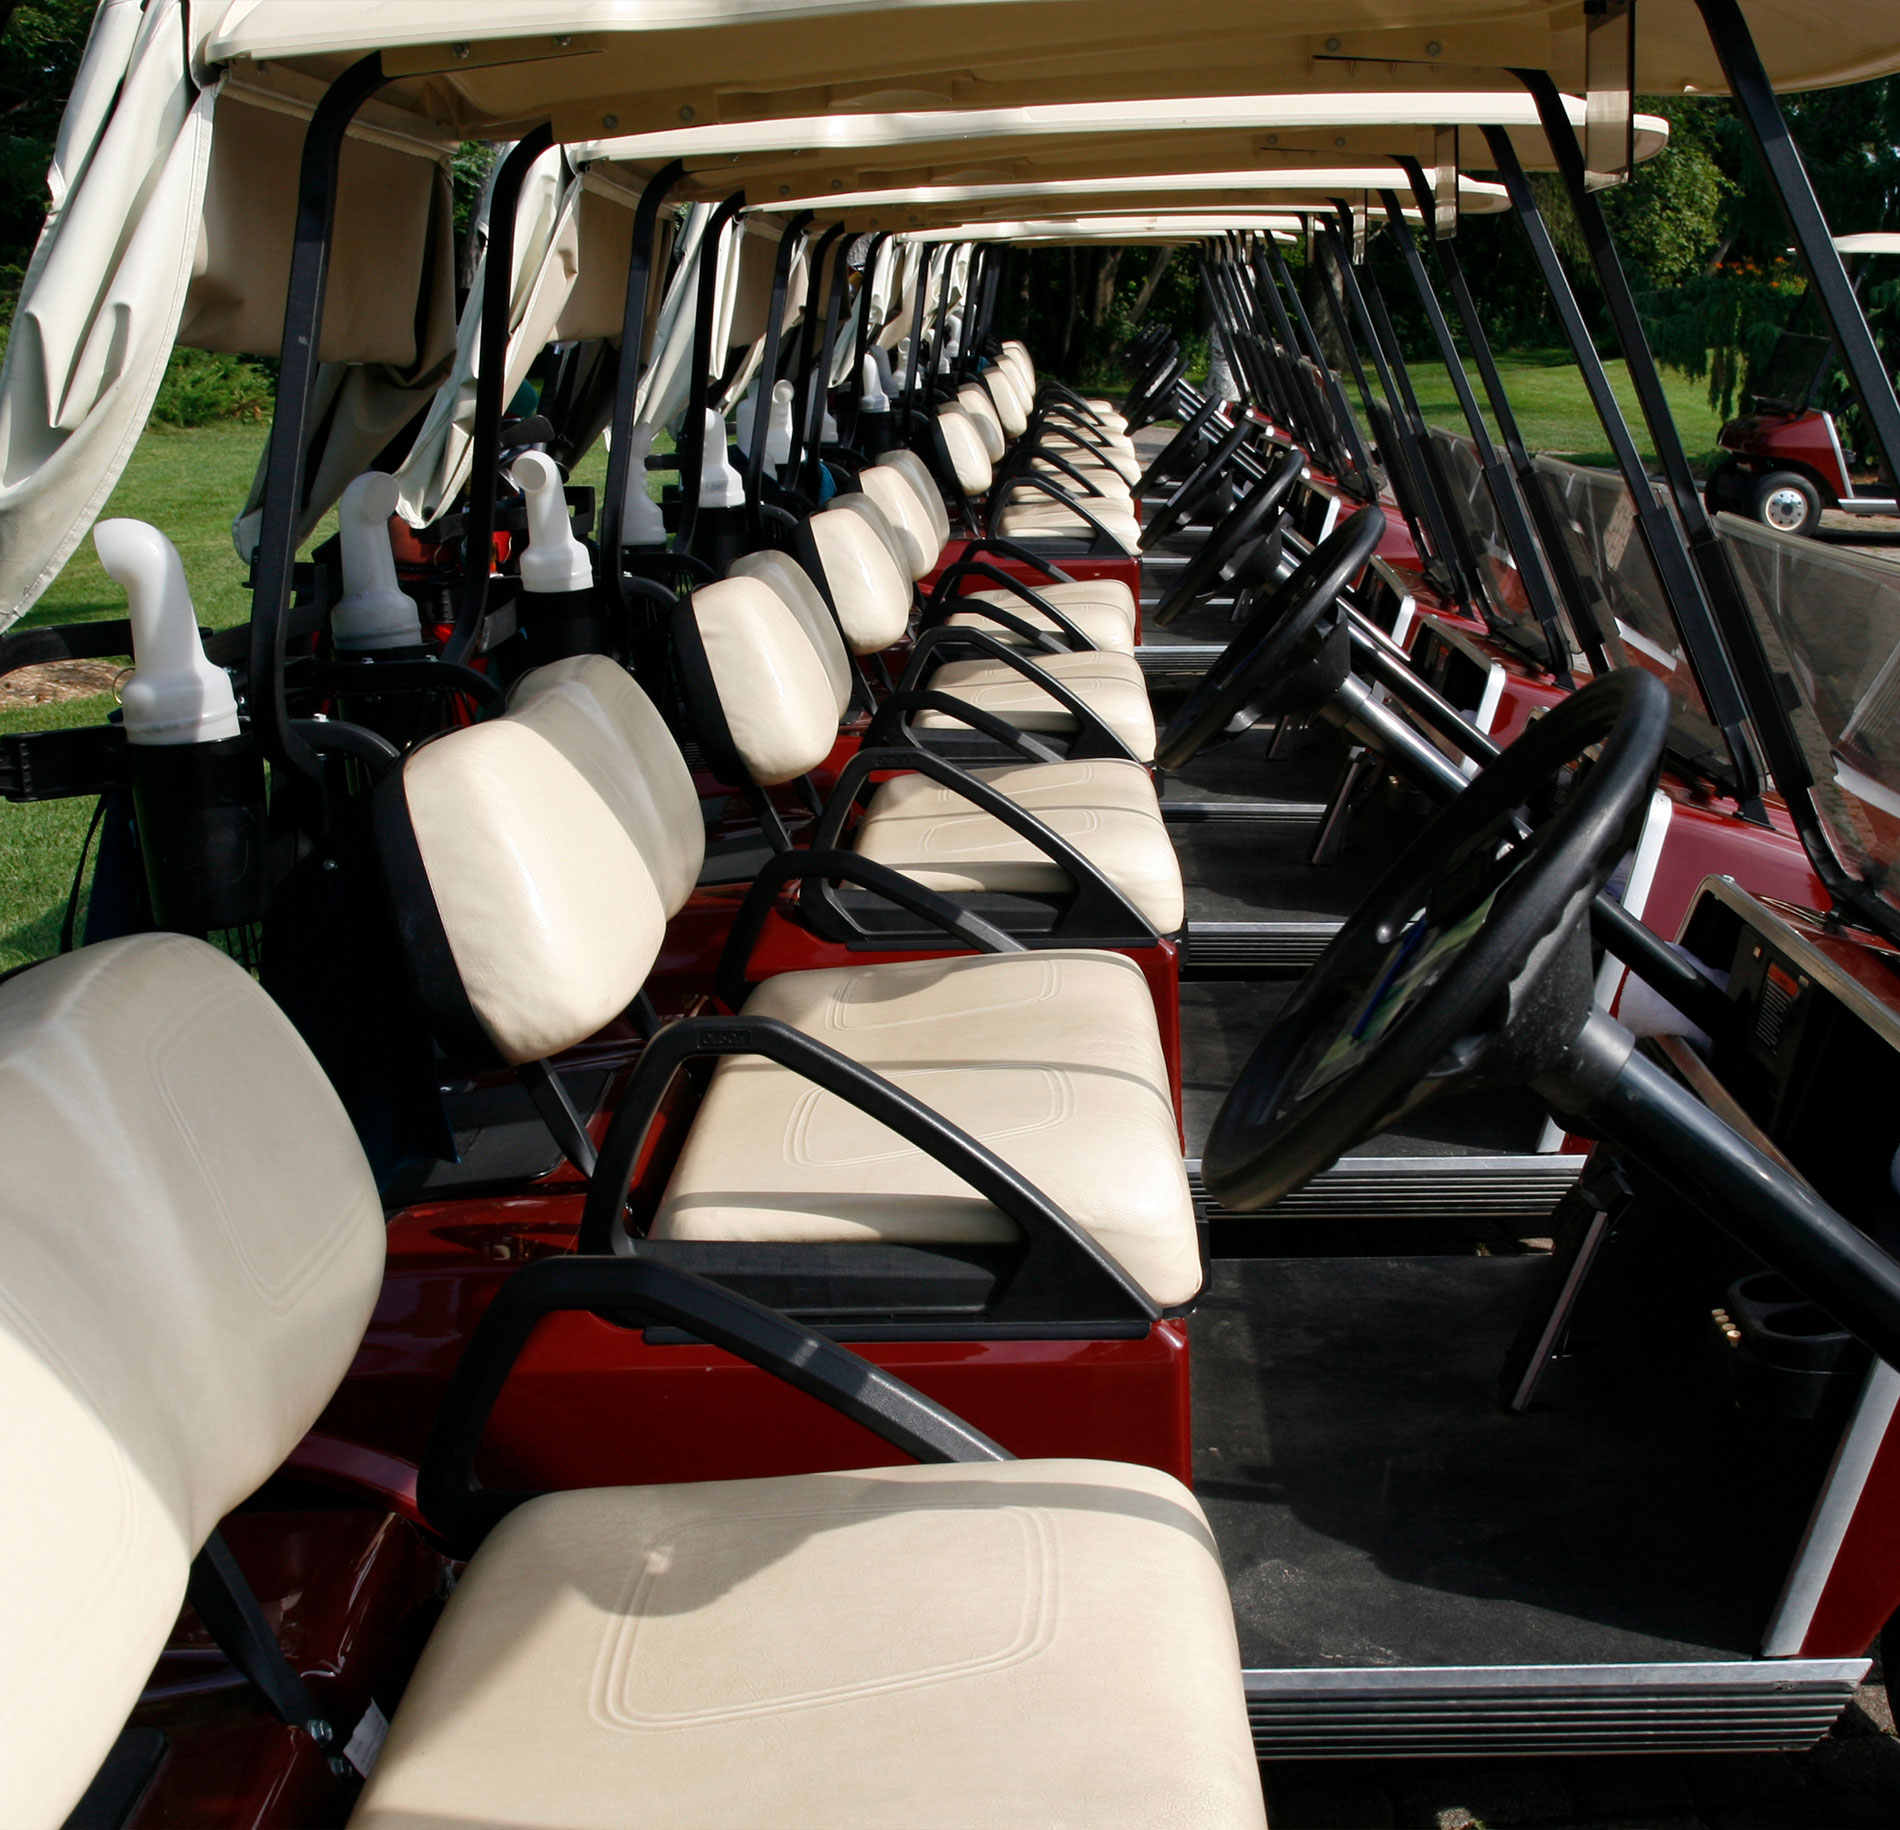 Golf carts in a row focused on the seats